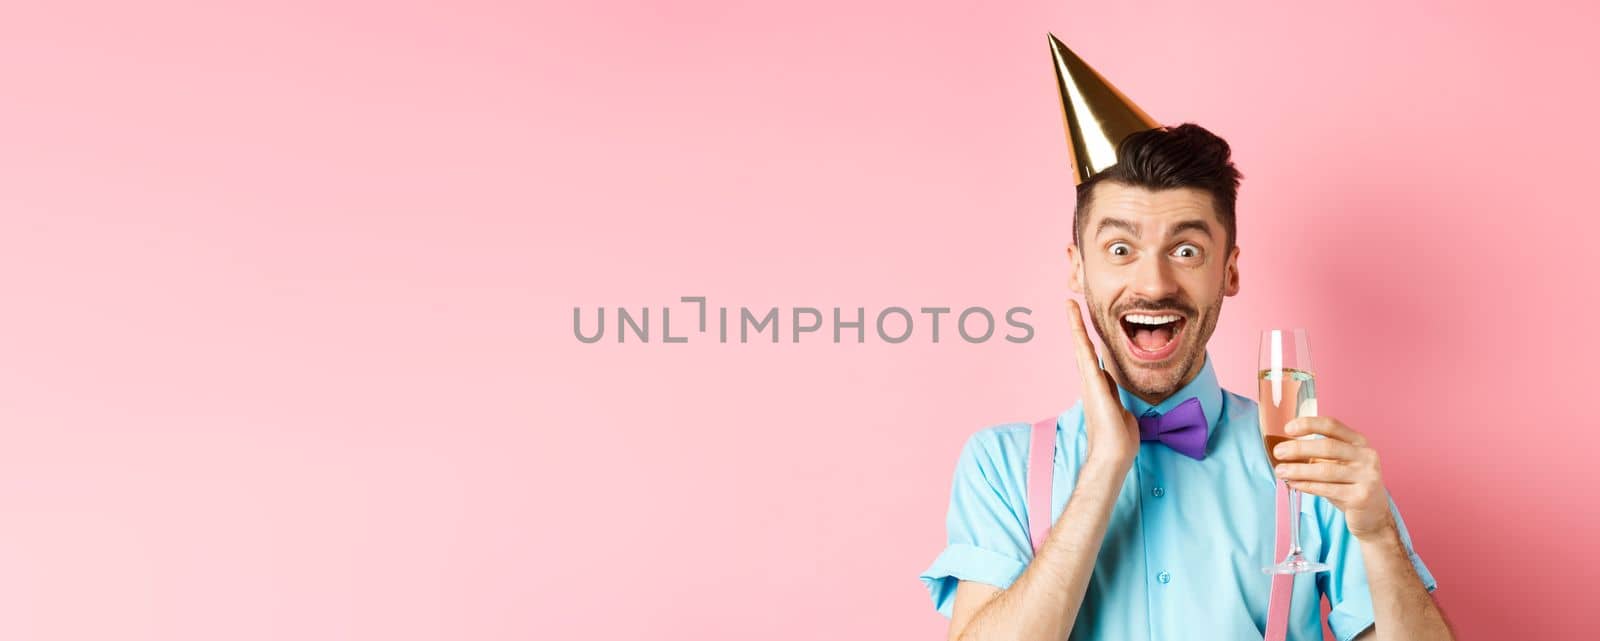 Holidays and celebration concept. Funny young man in birthday hat celebrating, screaming from joy and surprise, raising glass of champagne and smiling, standing on pink background.